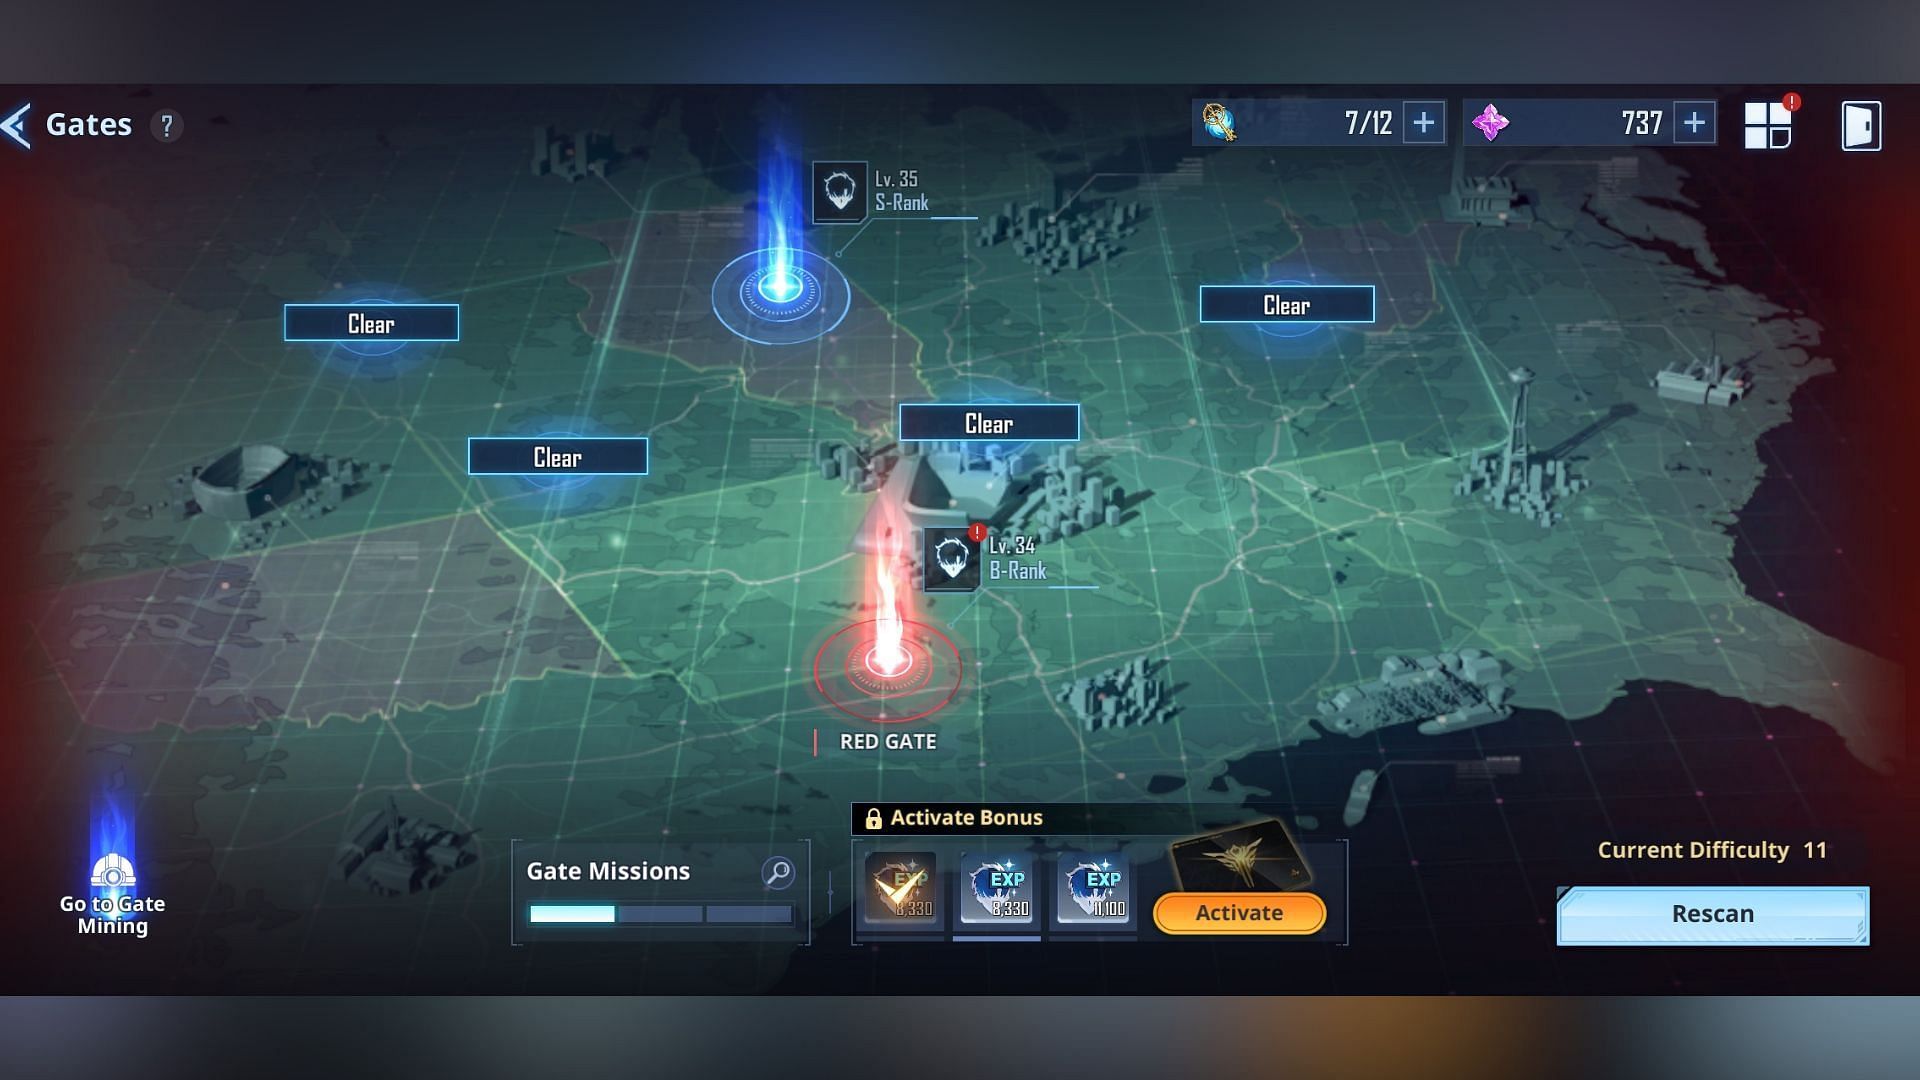 Play the Gates game mode to earn EXP and level up quickly in Solo Leveling Arise. (Image via Netmarble)